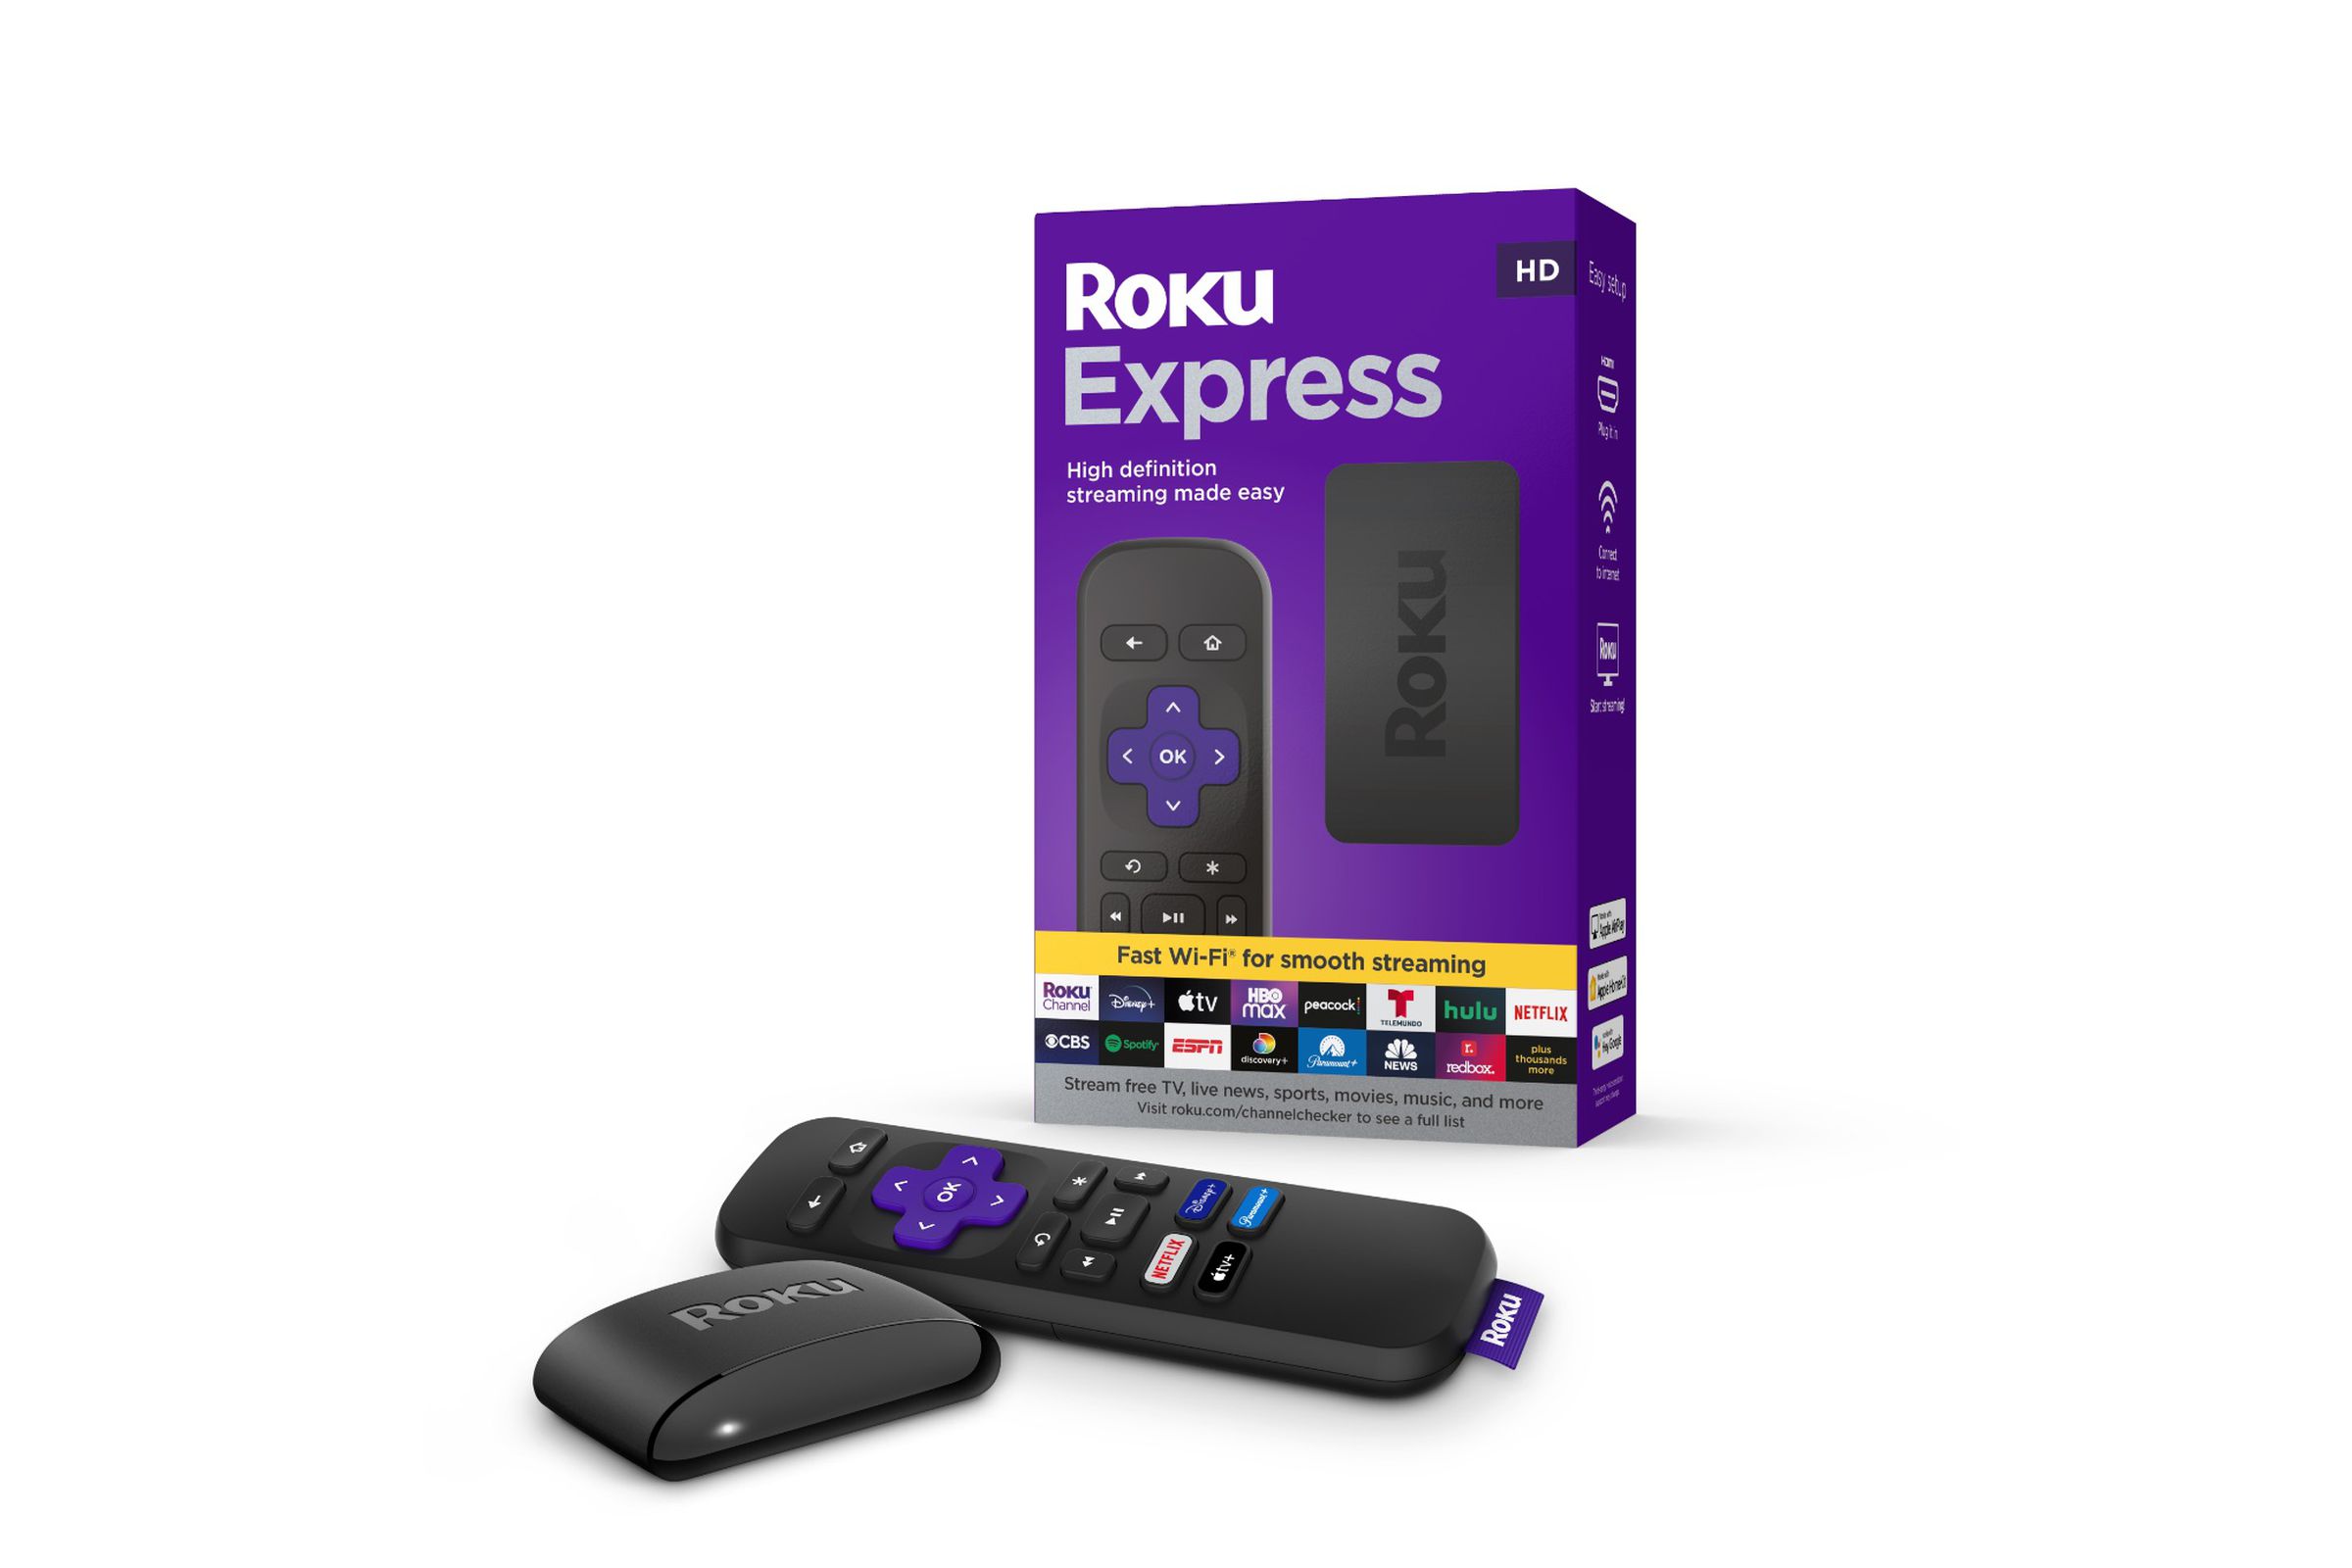 The Roku Express streams in HD and remains just $29.99.